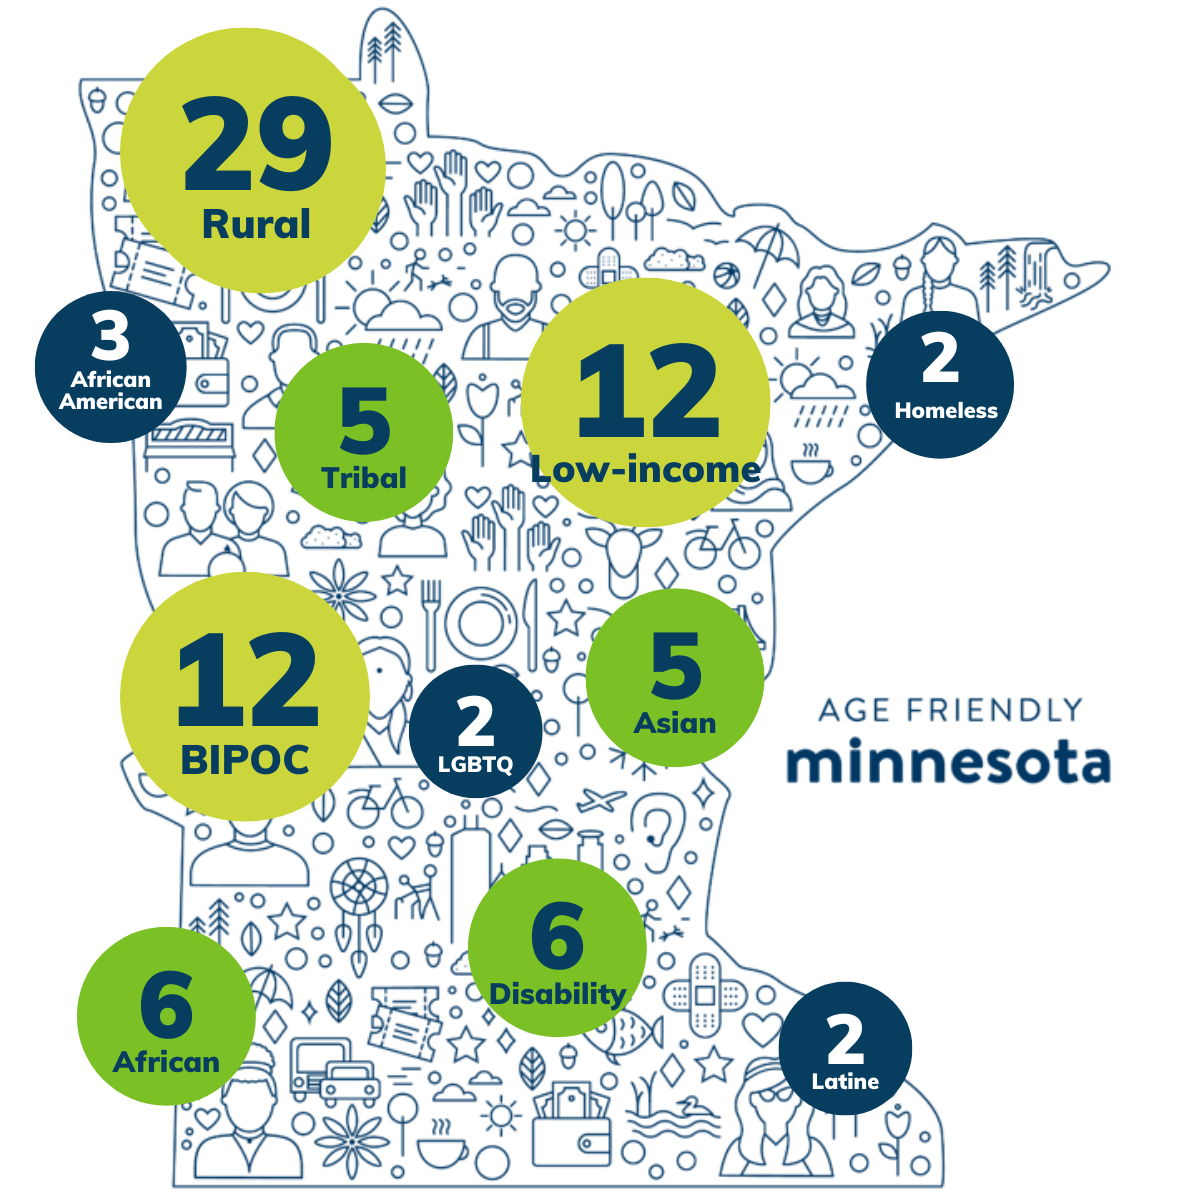 A map of Minnesota featuring the number of grants focused on specific communities, such as 29 rural, 12 low income, 12 BIPOC, 6 African, 3 African American, 5 Tribes, 6 Disabilities, 5 Asian, 2 homeless, 2 Latine, and 2 LGBTQ